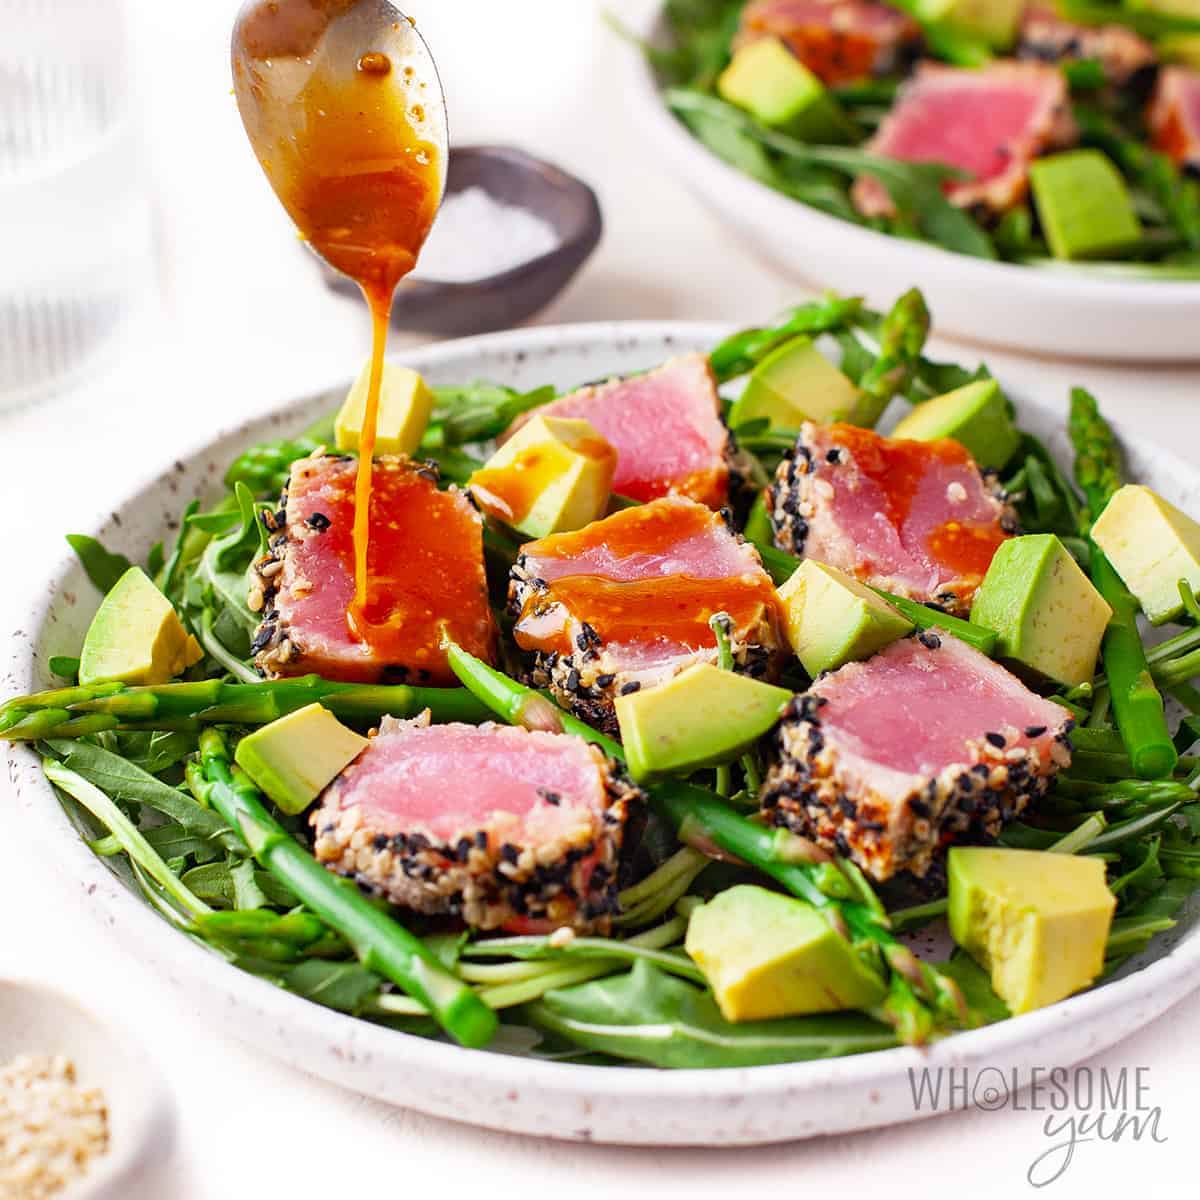 Drizzling dressing over black sesame crusted tuna and salad.